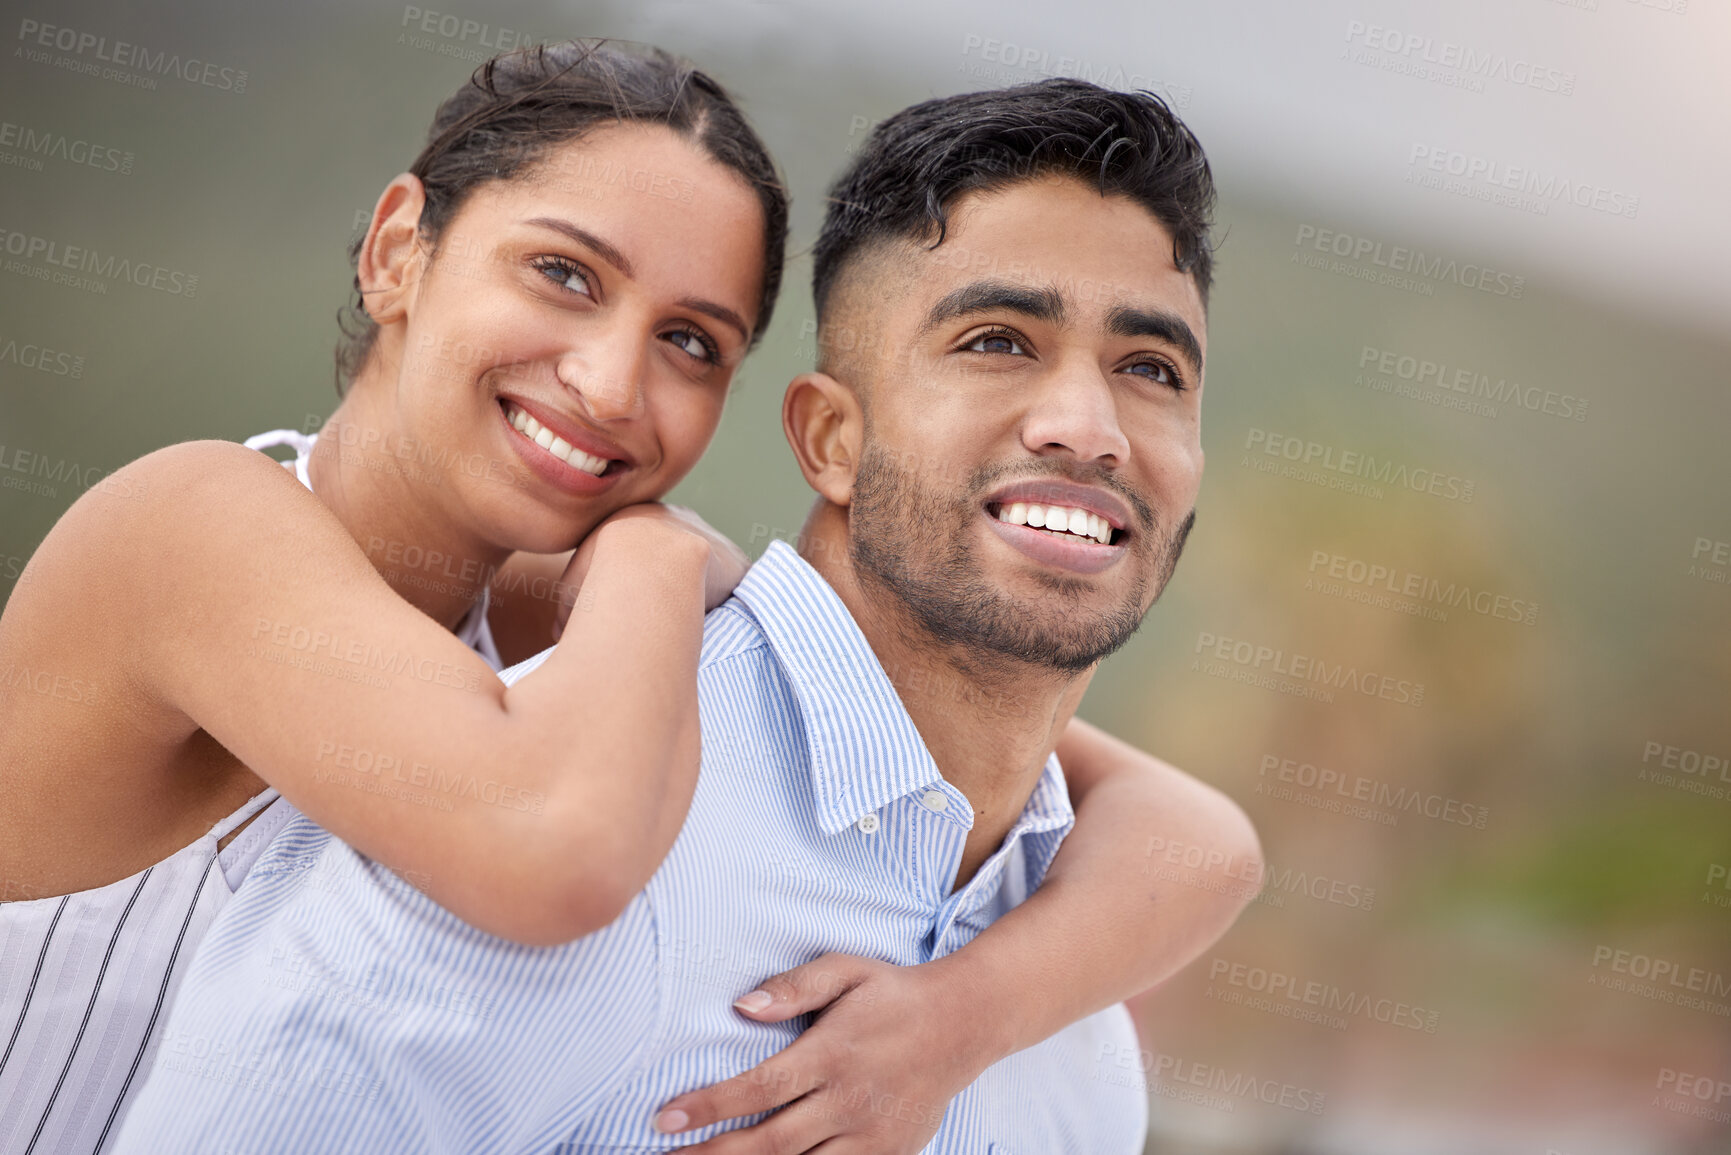 Buy stock photo Shot of a young couple spending time at the beach